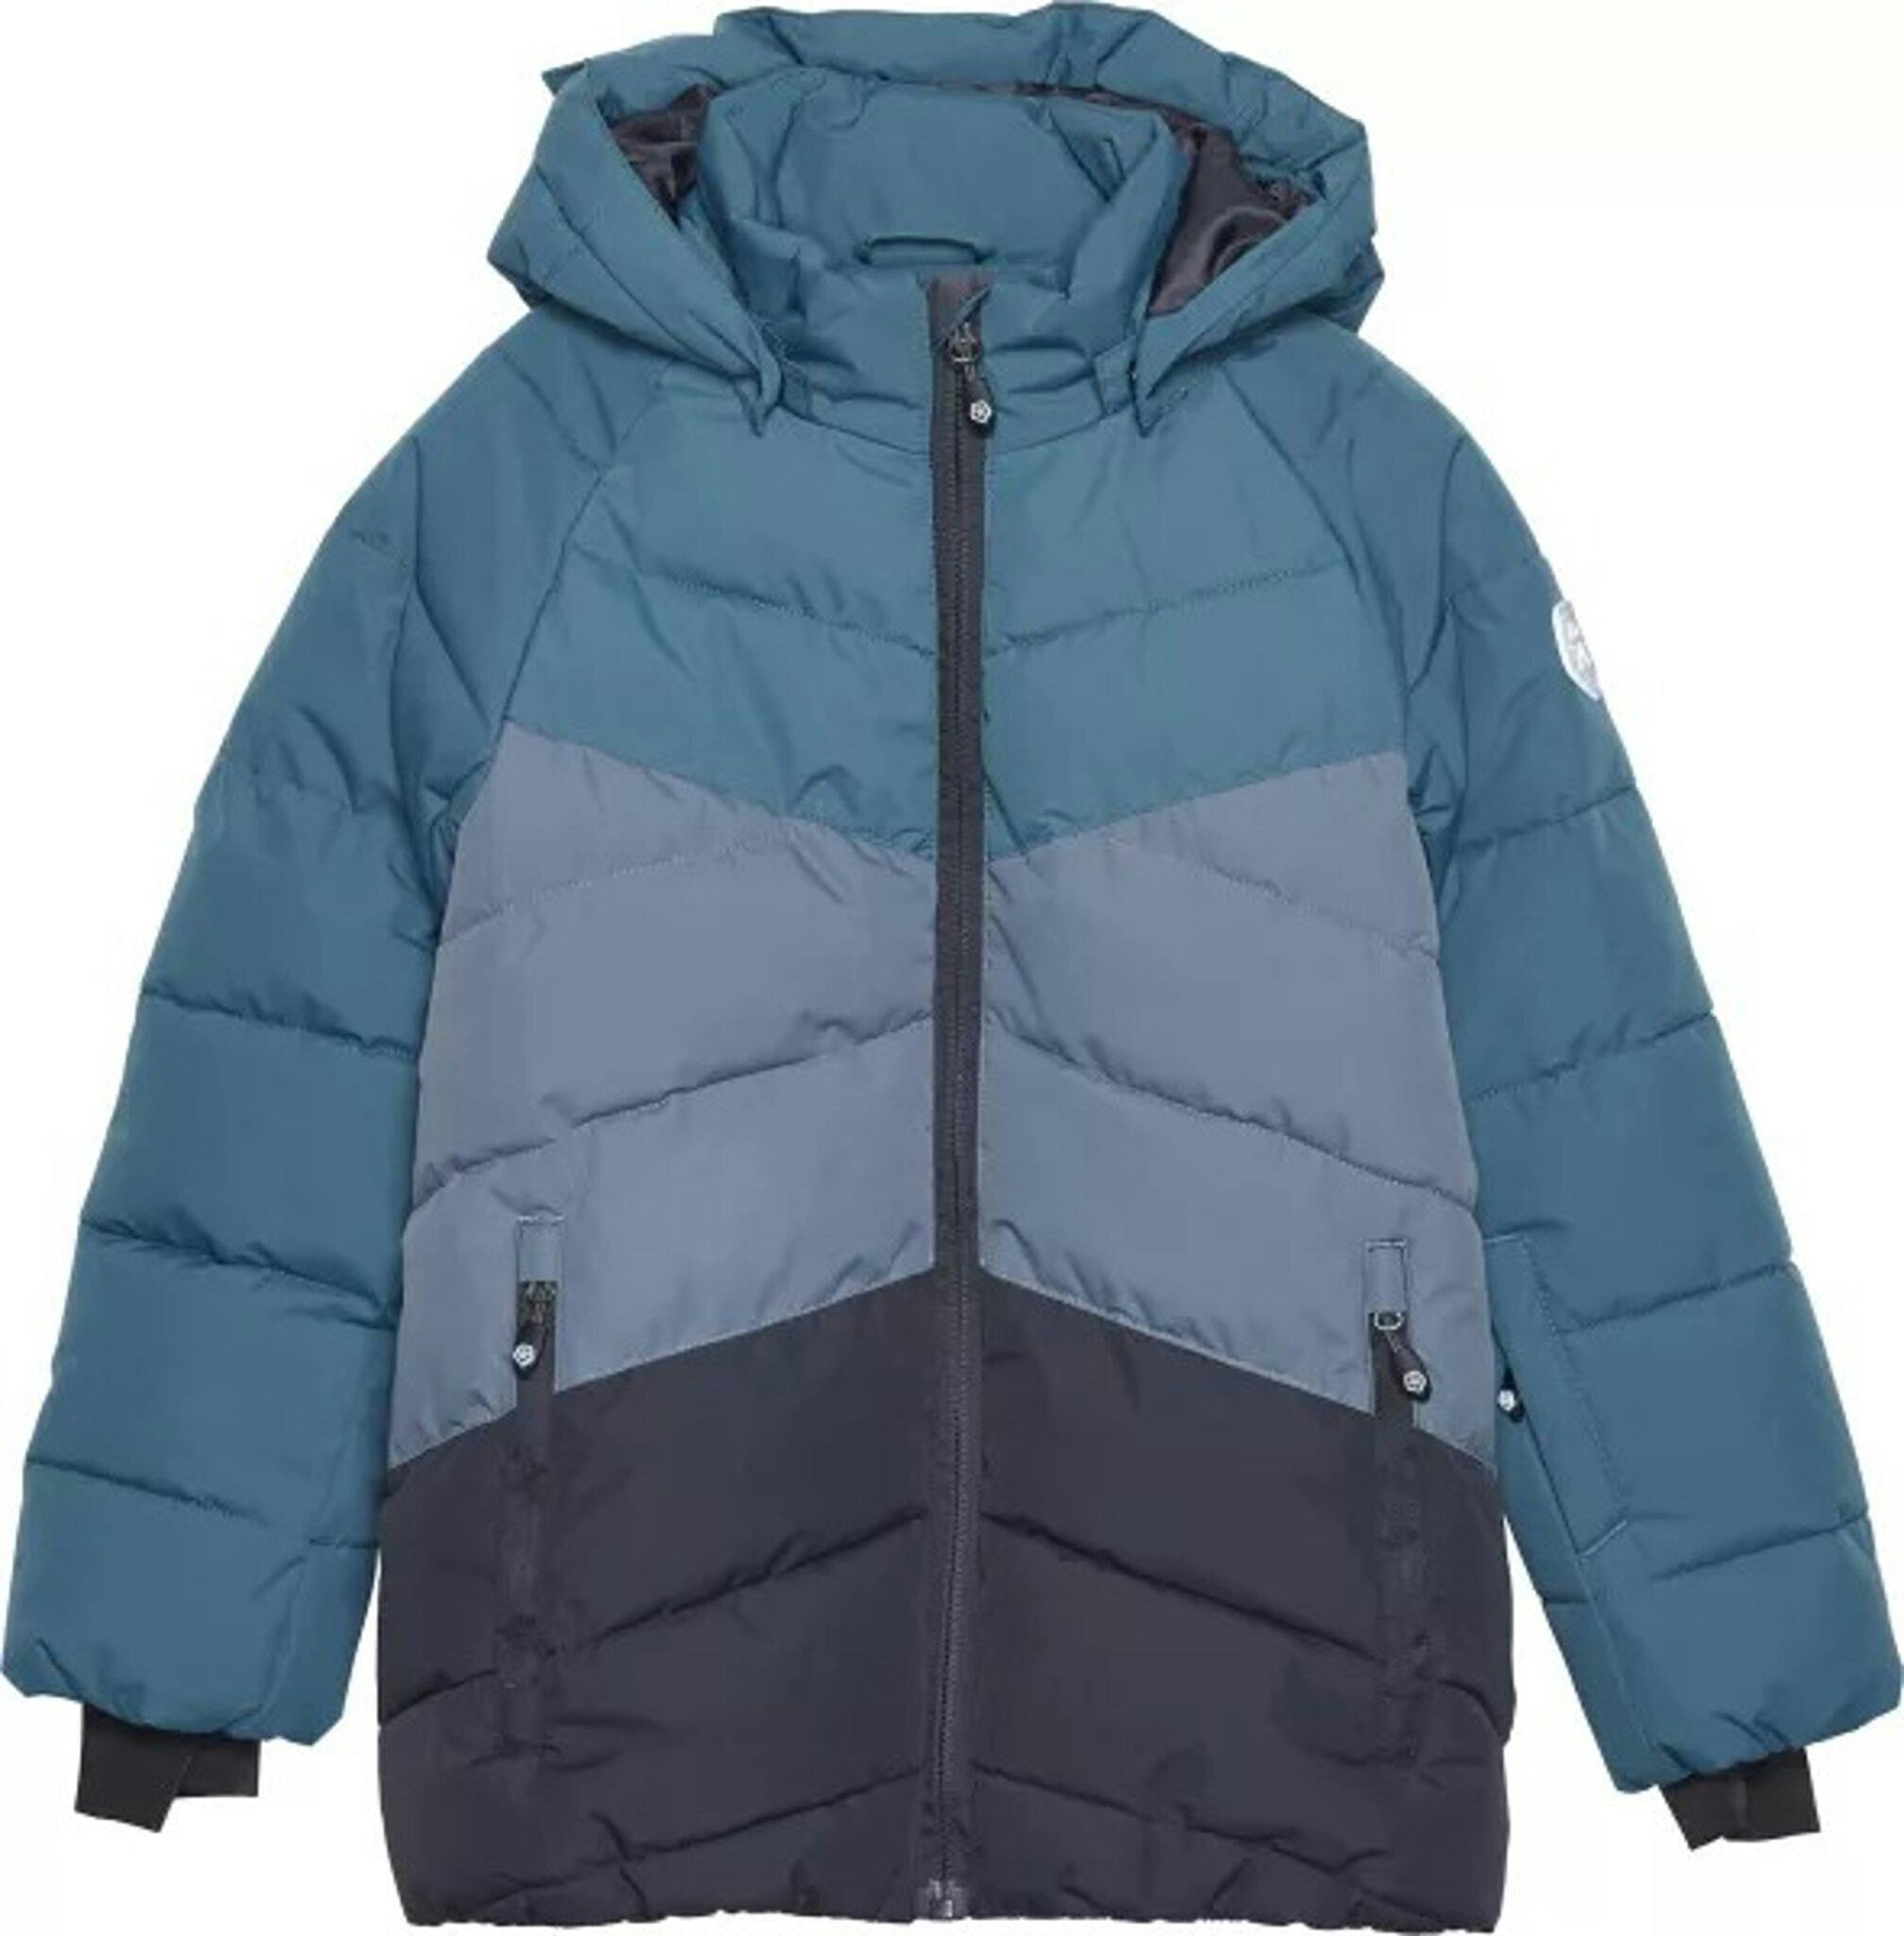 Product image for Colorblock Quilted Ski Jacket - Youth